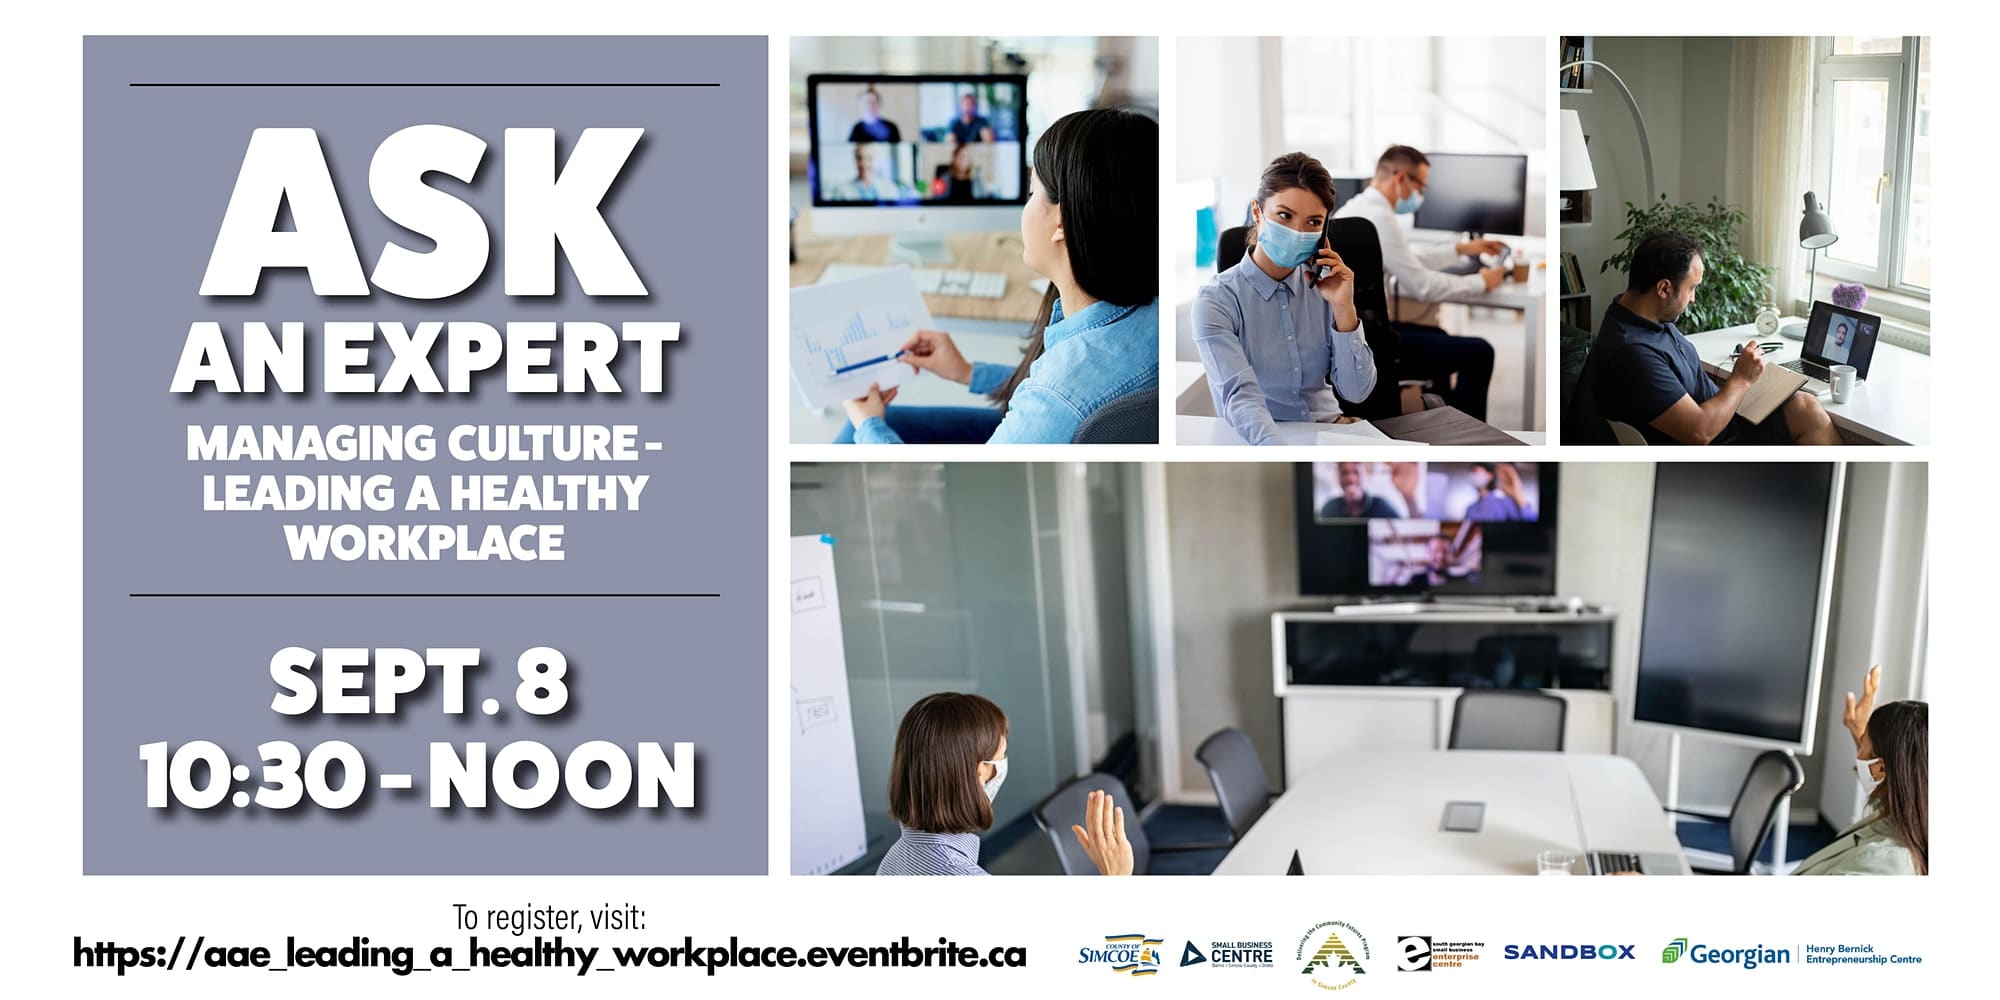 Ask an Expert: Managing Culture - Leading a Healthy Workplace @ Sept. 8th 10:30am - 12pm